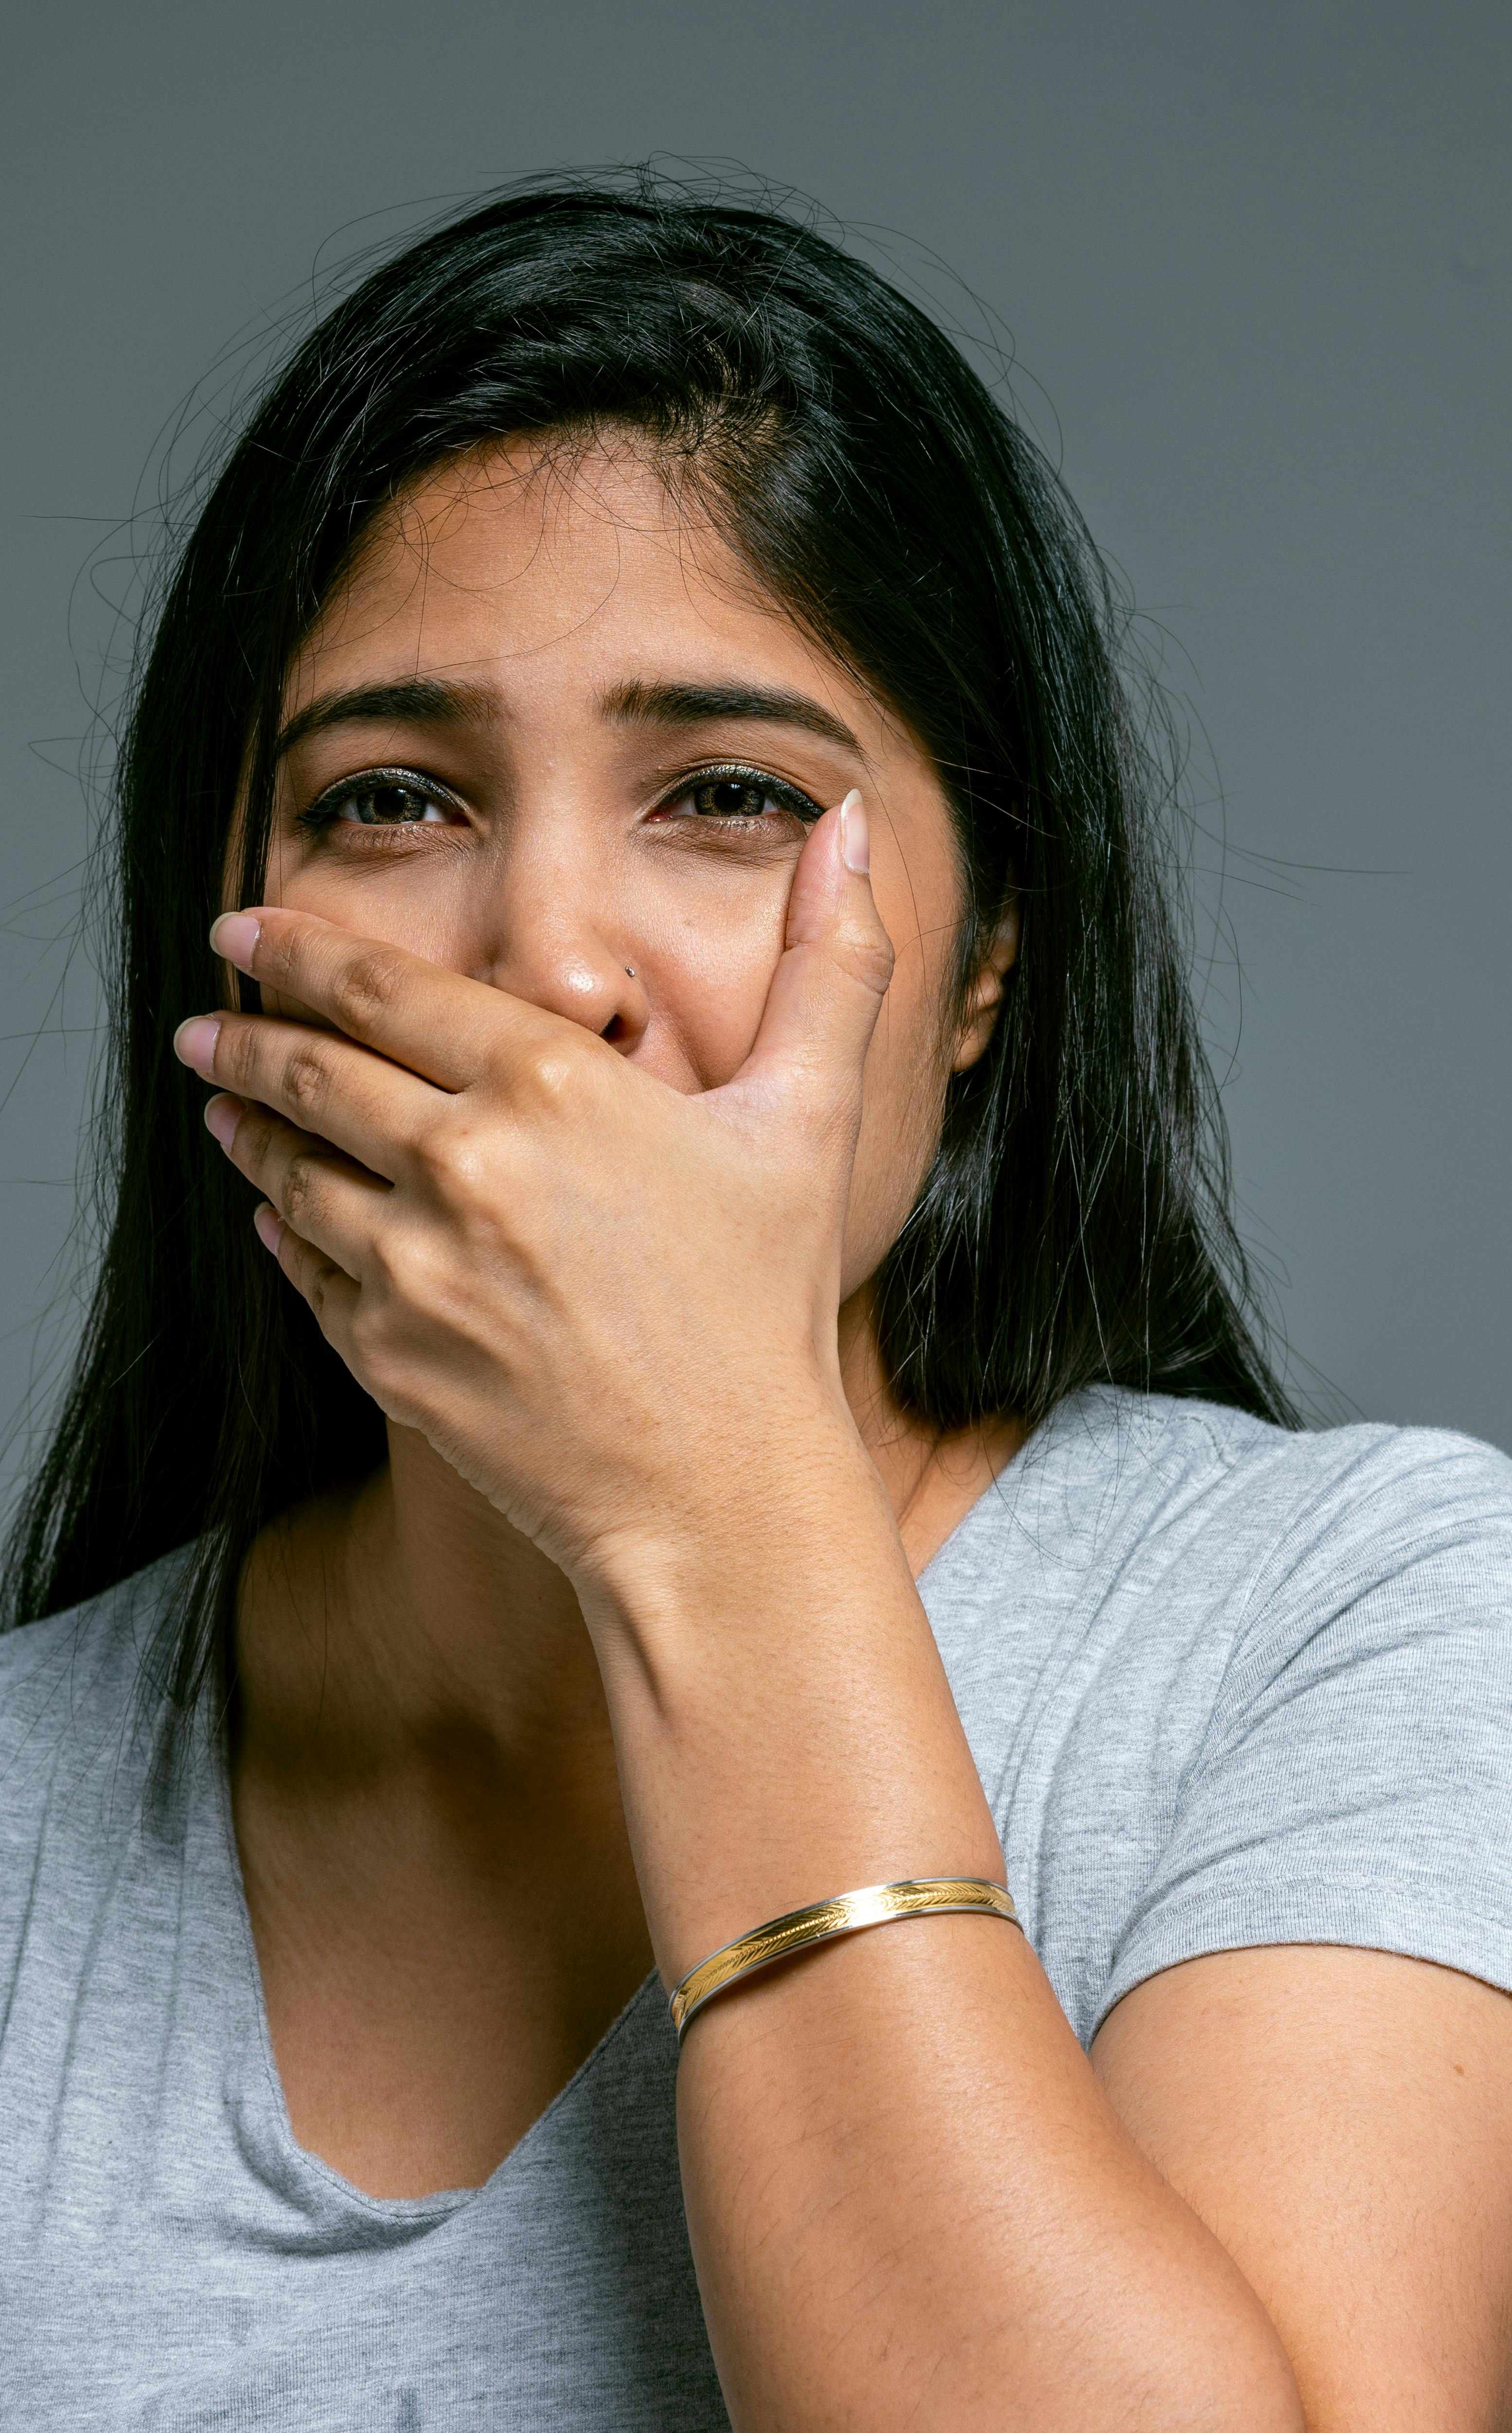 Woman nearly in tears | Source: Pexels